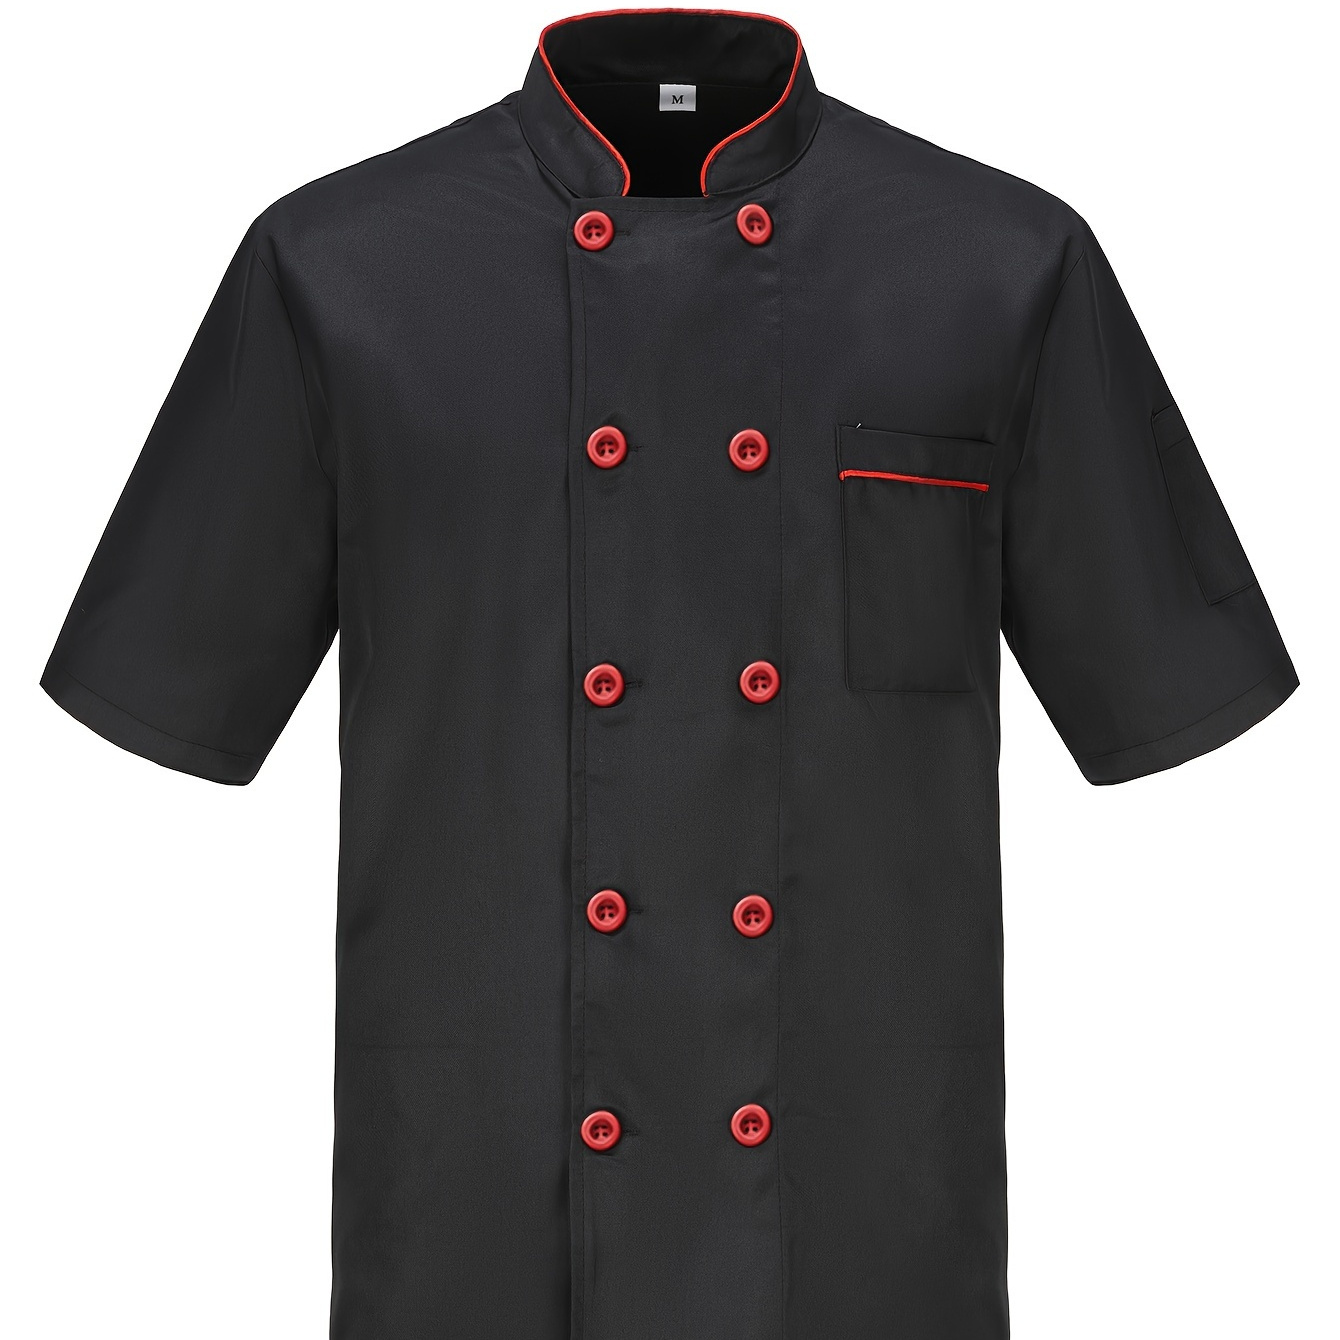 

Double Breasted Chef Cooking Uniform For Kitchen Short Sleeve Jacket Shirt For Men Adult Restaurant